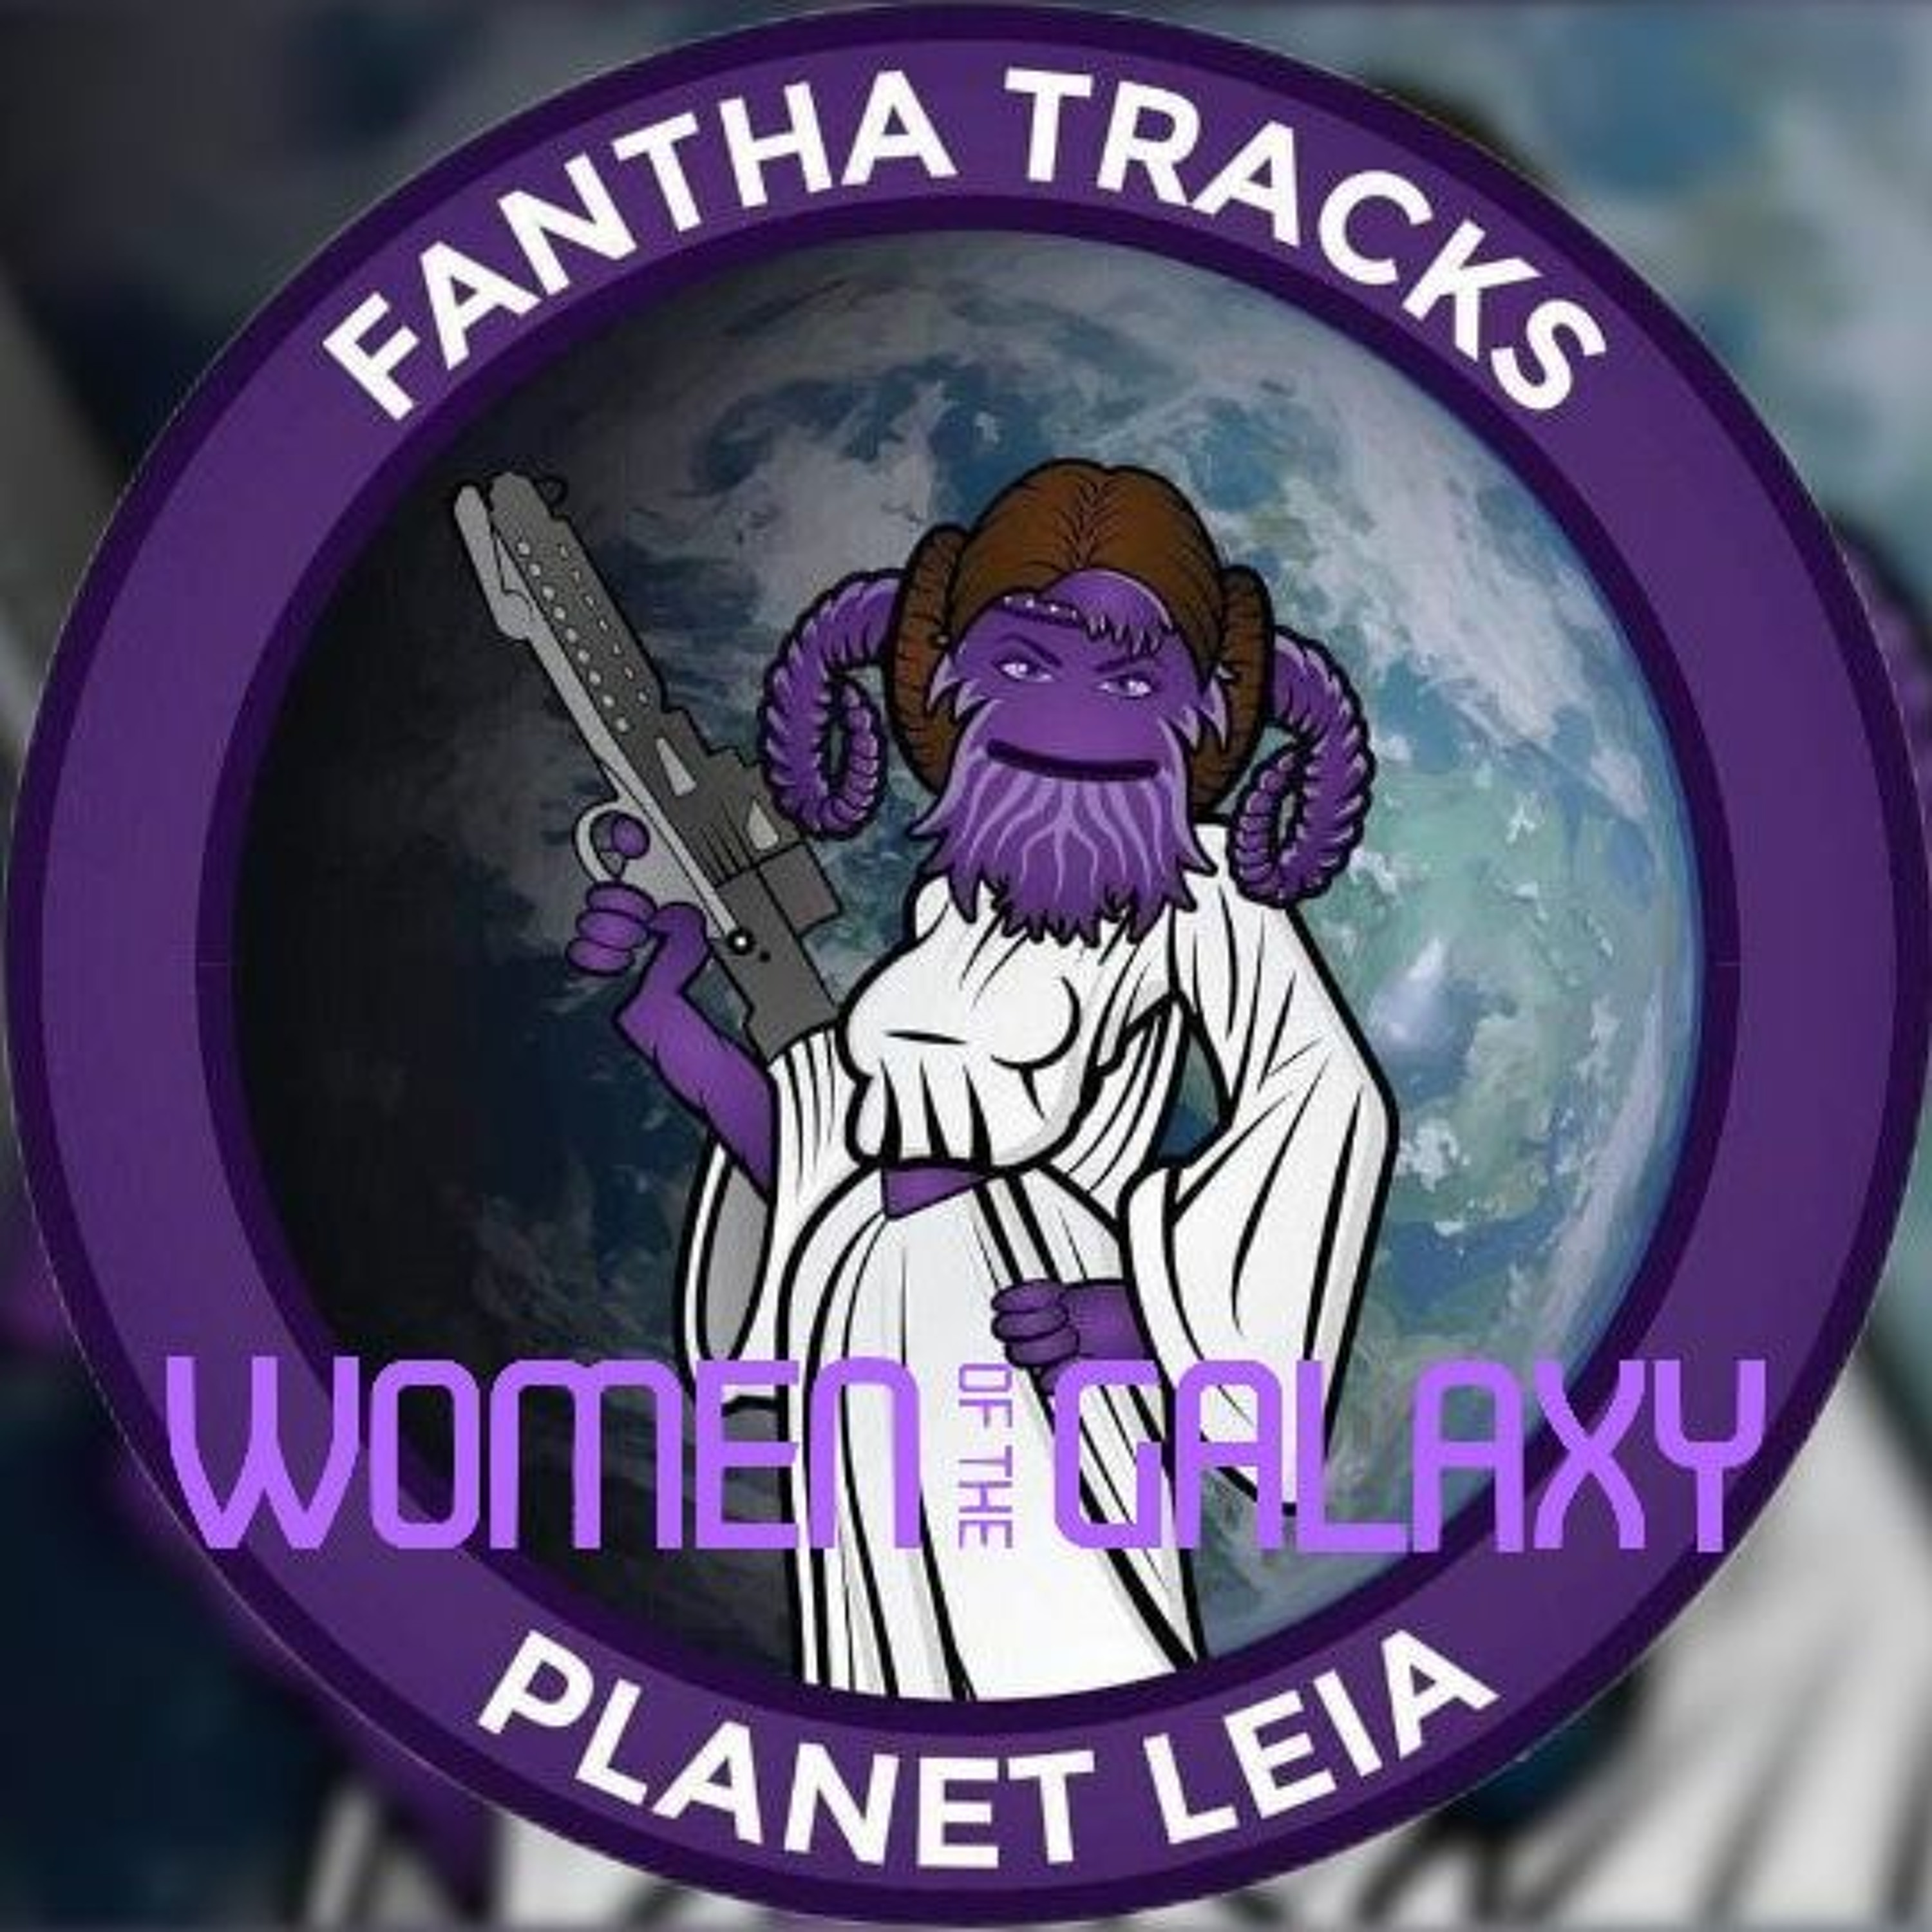 Planet Leia Episode 17: Stop that. My hands are dirty